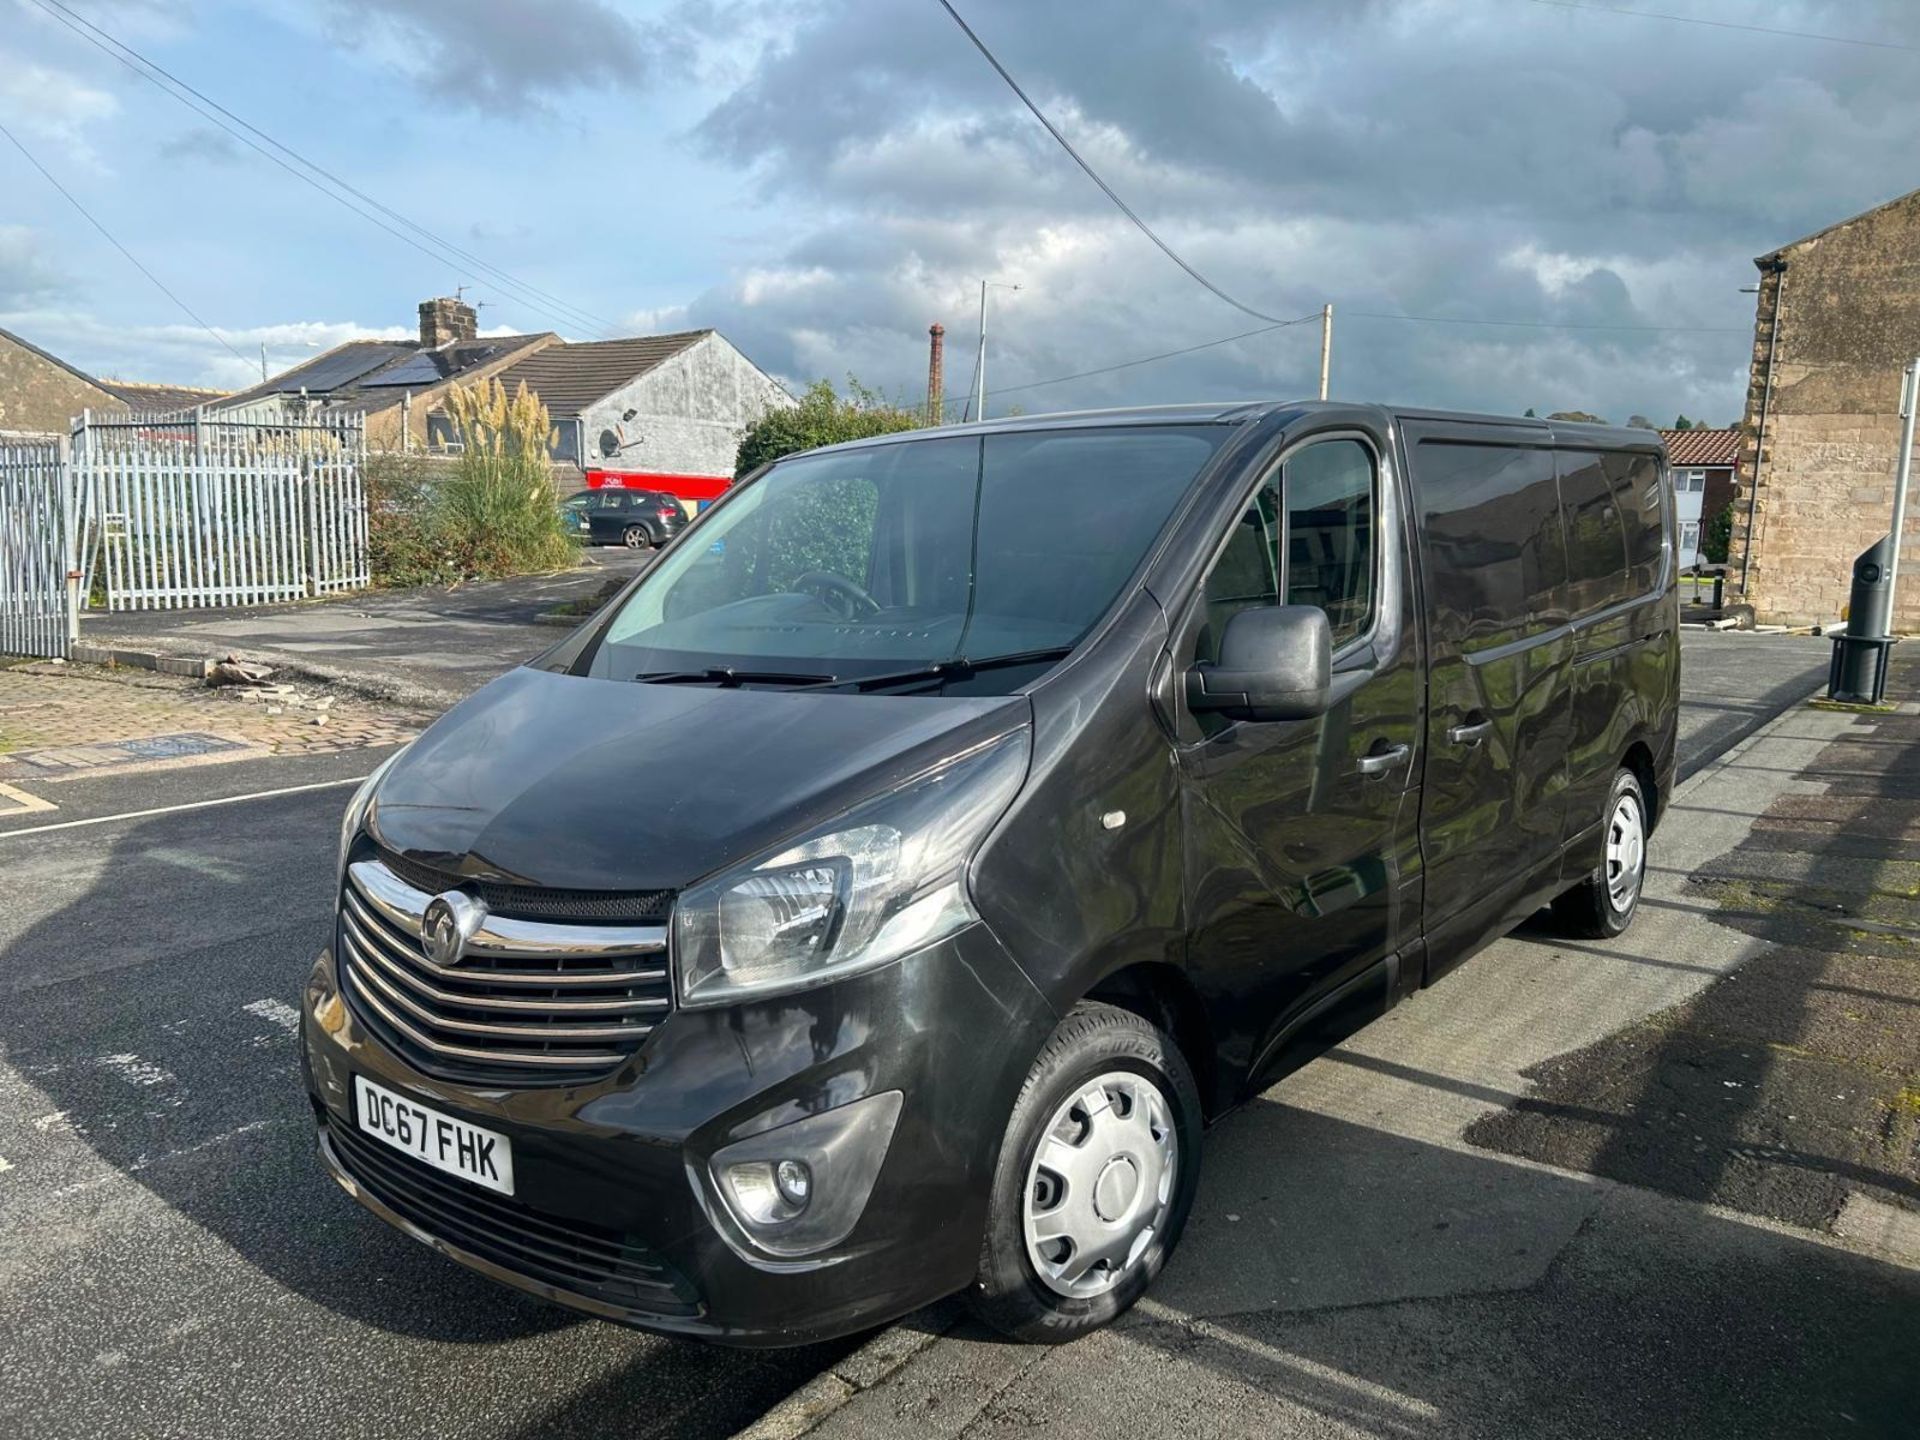 2018 VAUXHALL VIVARO SPORTIVE -128K MILES- HPI CLEAR - READY FOR ADVENTURE! - Image 11 of 11